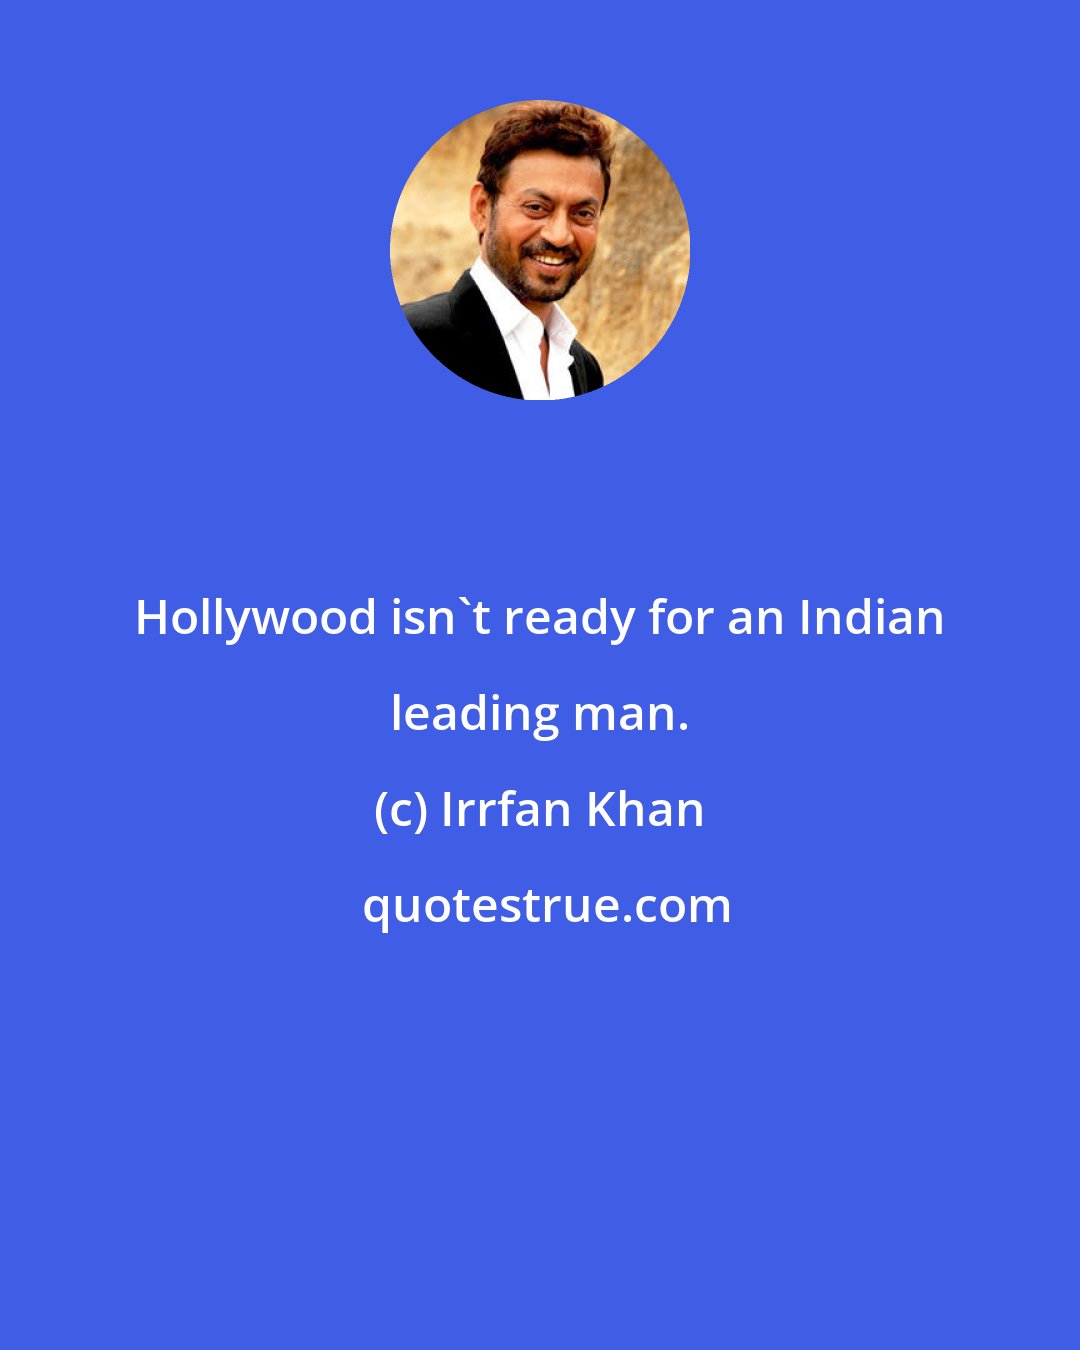 Irrfan Khan: Hollywood isn't ready for an Indian leading man.